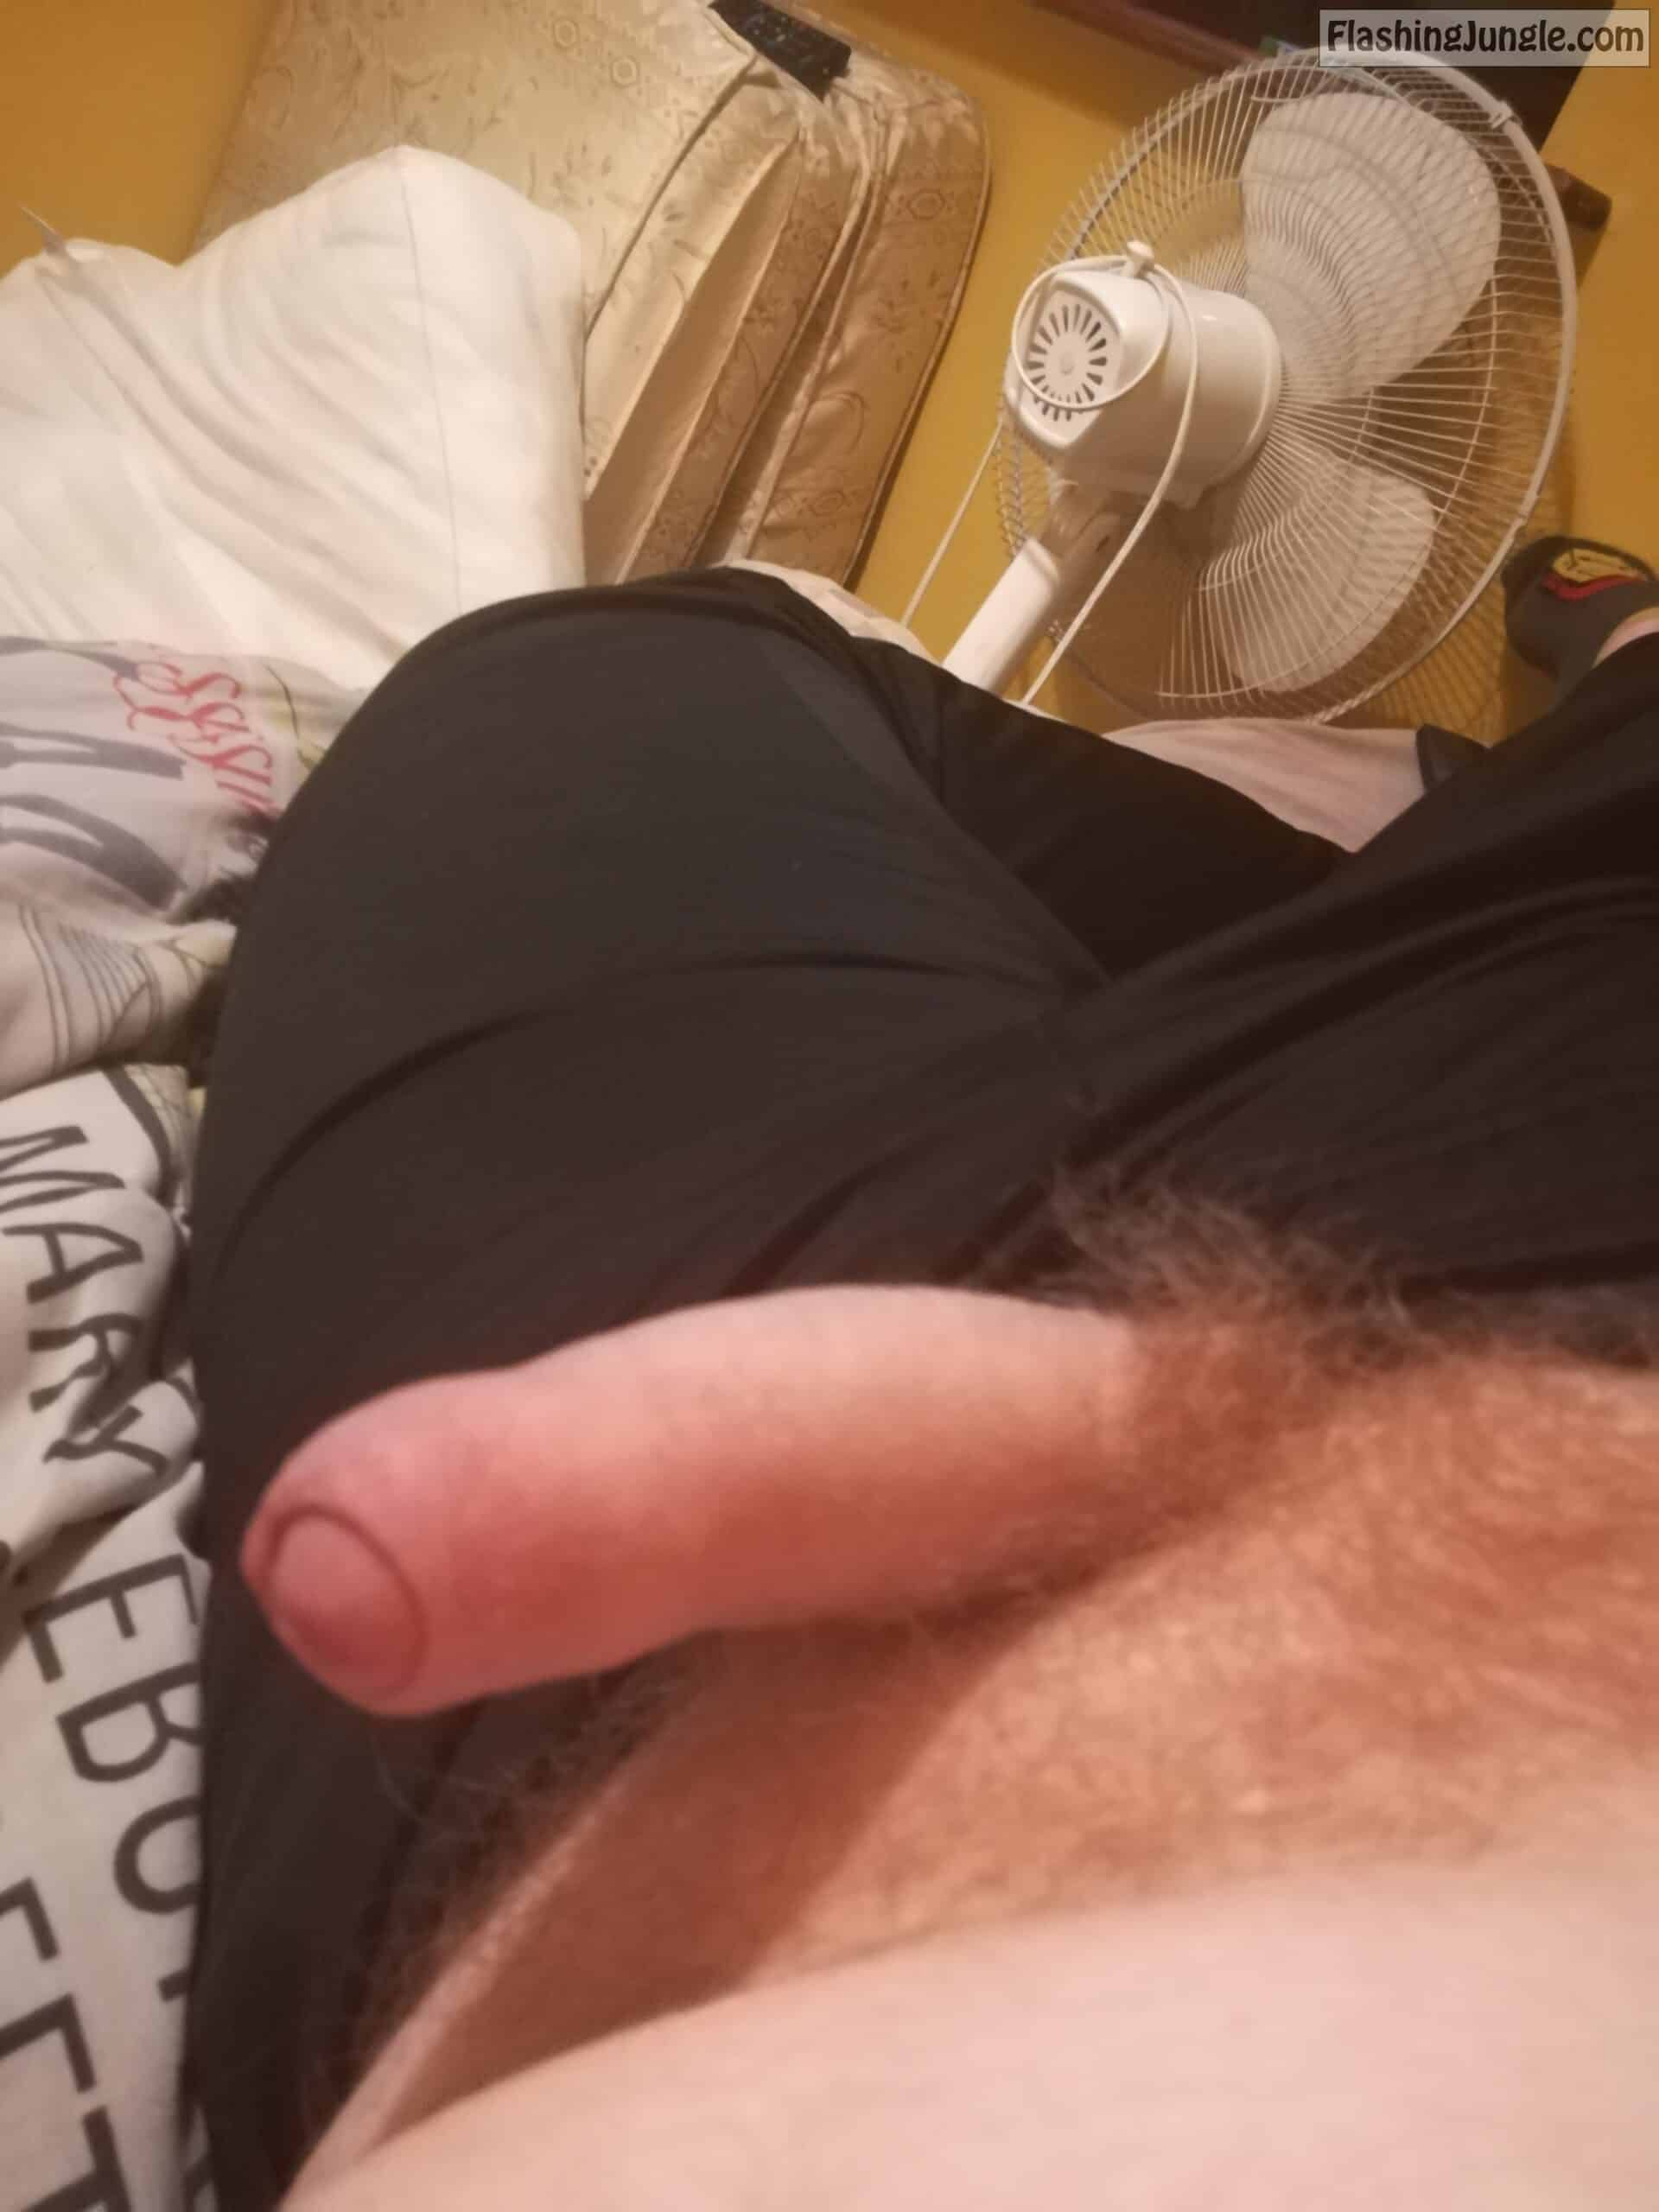 homemade hotwife pics - My Amazing Foreskin Dick This is my first dick pic - Dick Flash Pics